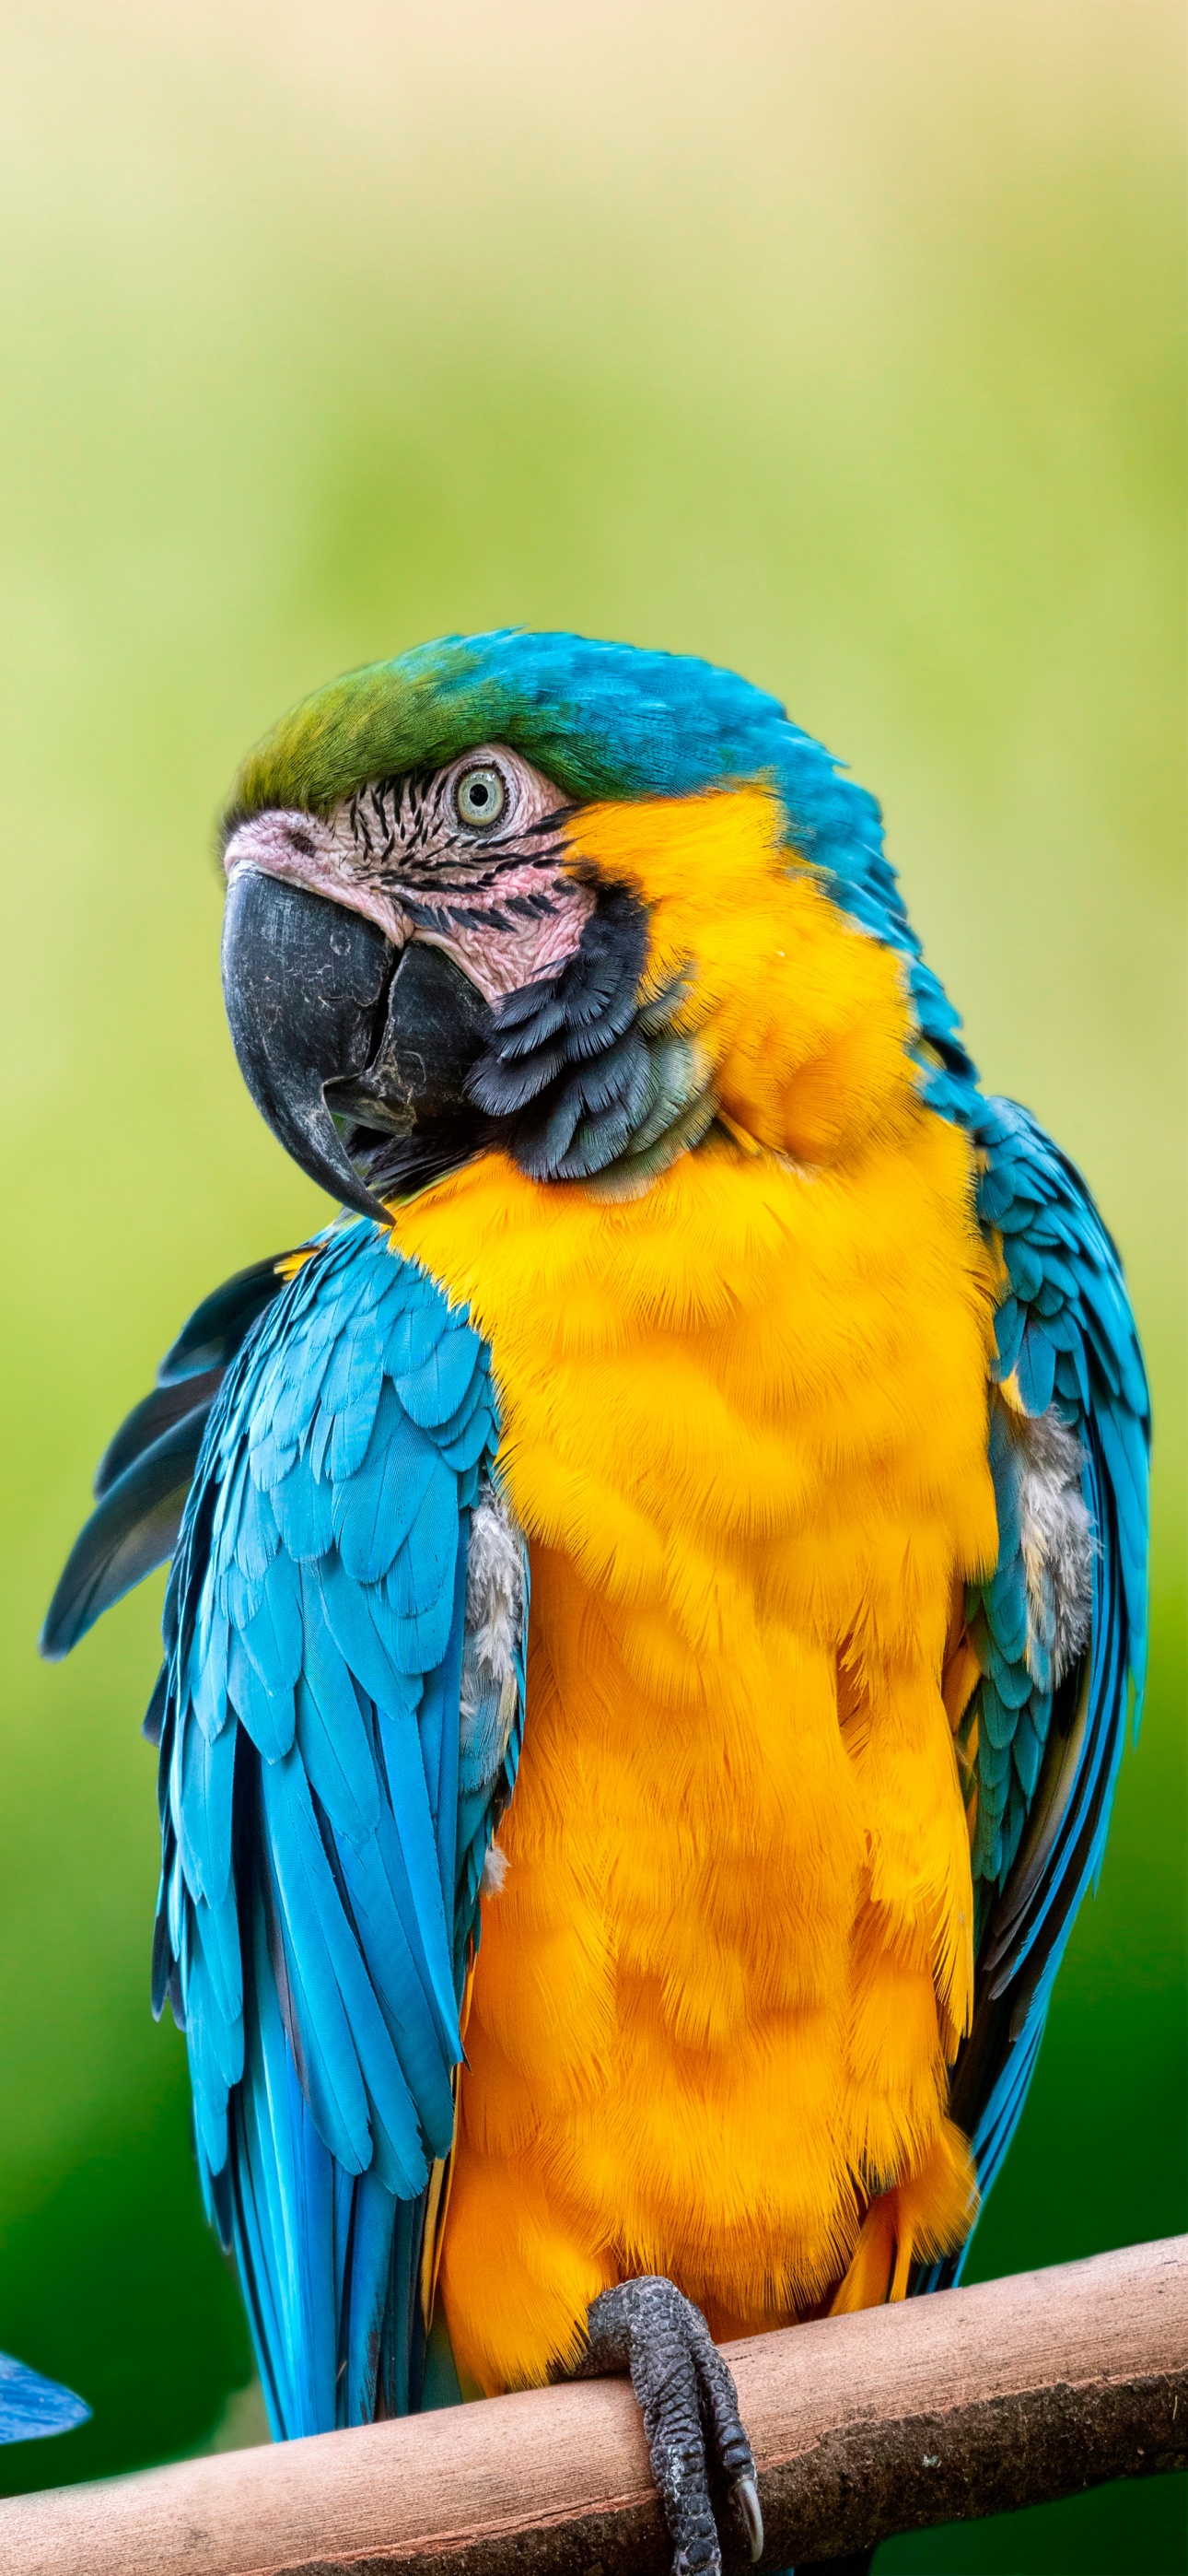 Wallpaper macaw parrot colorful bird muzzle close up desktop wallpaper  hd image picture background 23aeeb  wallpapersmug